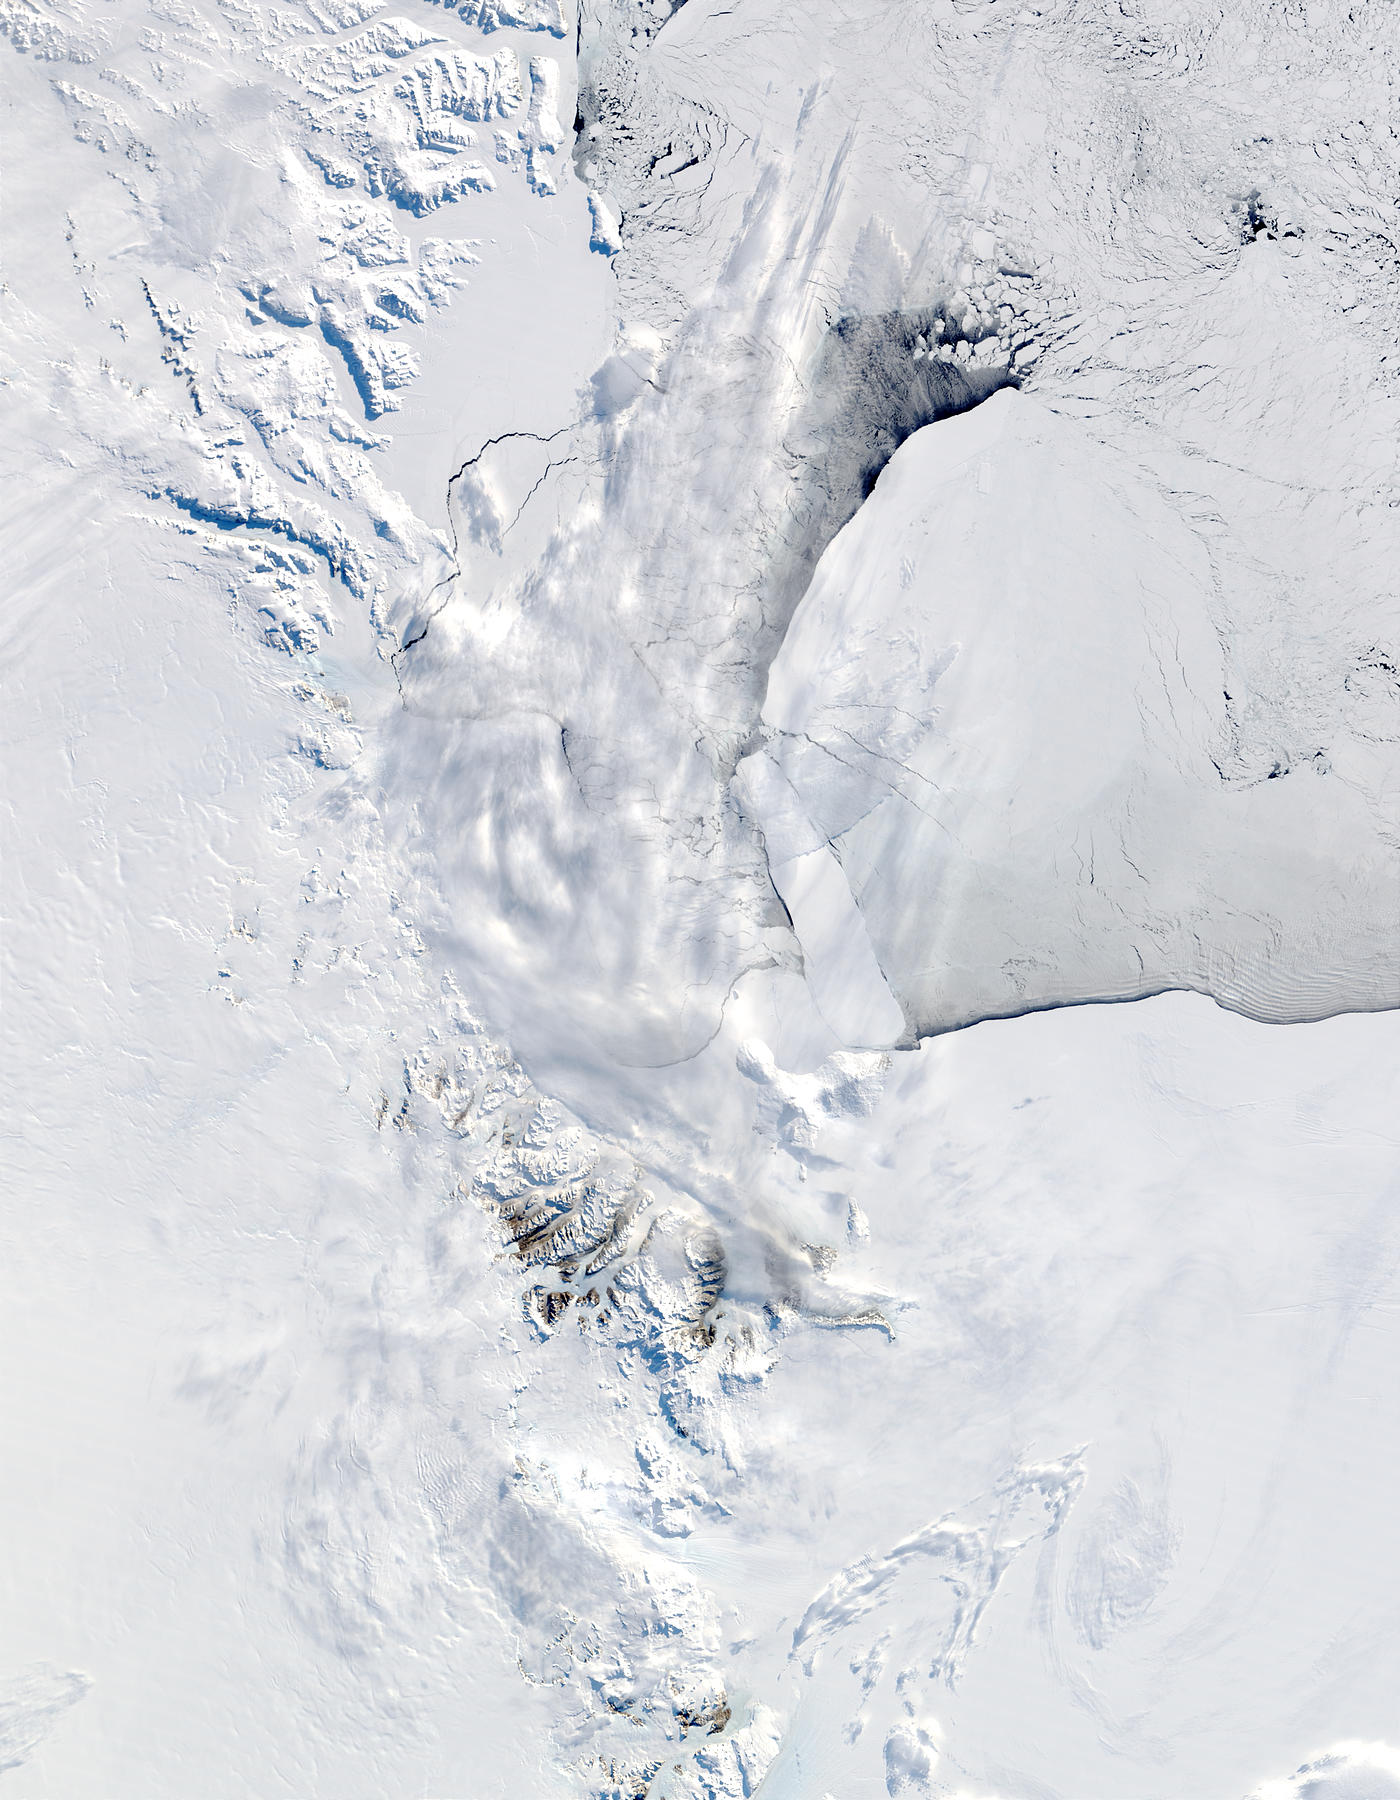 C-16, C-19 and B-15A icebergs in the Ross Sea, Antarctica - related image preview